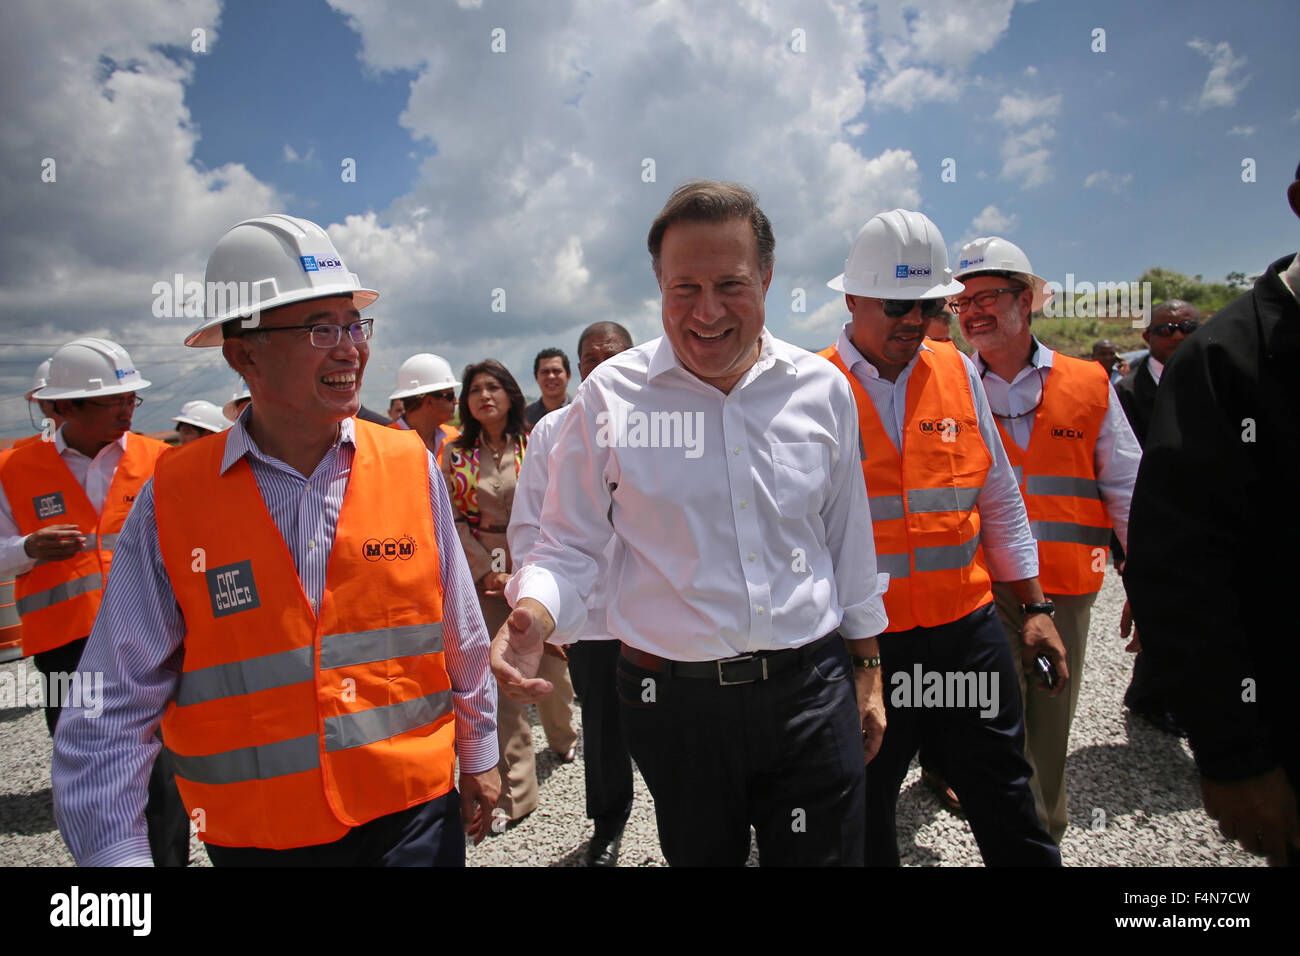 (151021) -- PANAMA CIY, Oct. 21, 2015 (Xinhua) -- Panamanian President Juan Carlos Varela (2nd Front), attends the ceremony marking the official go-ahead for the construction work of the residential project Ciudad de Esperanza, in Arraijan, Panama, on Oct. 19, 2015. Panama's largest residential development project, Ciudad de Esperanza or City of Hope, broke ground on Monday in the West Panama Province. The 137 million-U.S. dollar project, to be constructed by China Construction America (CCA) - MCM Consortium, will benefit 11,250 people in the city of Vista Alegre, in the province's Arraijan d Stock Photo